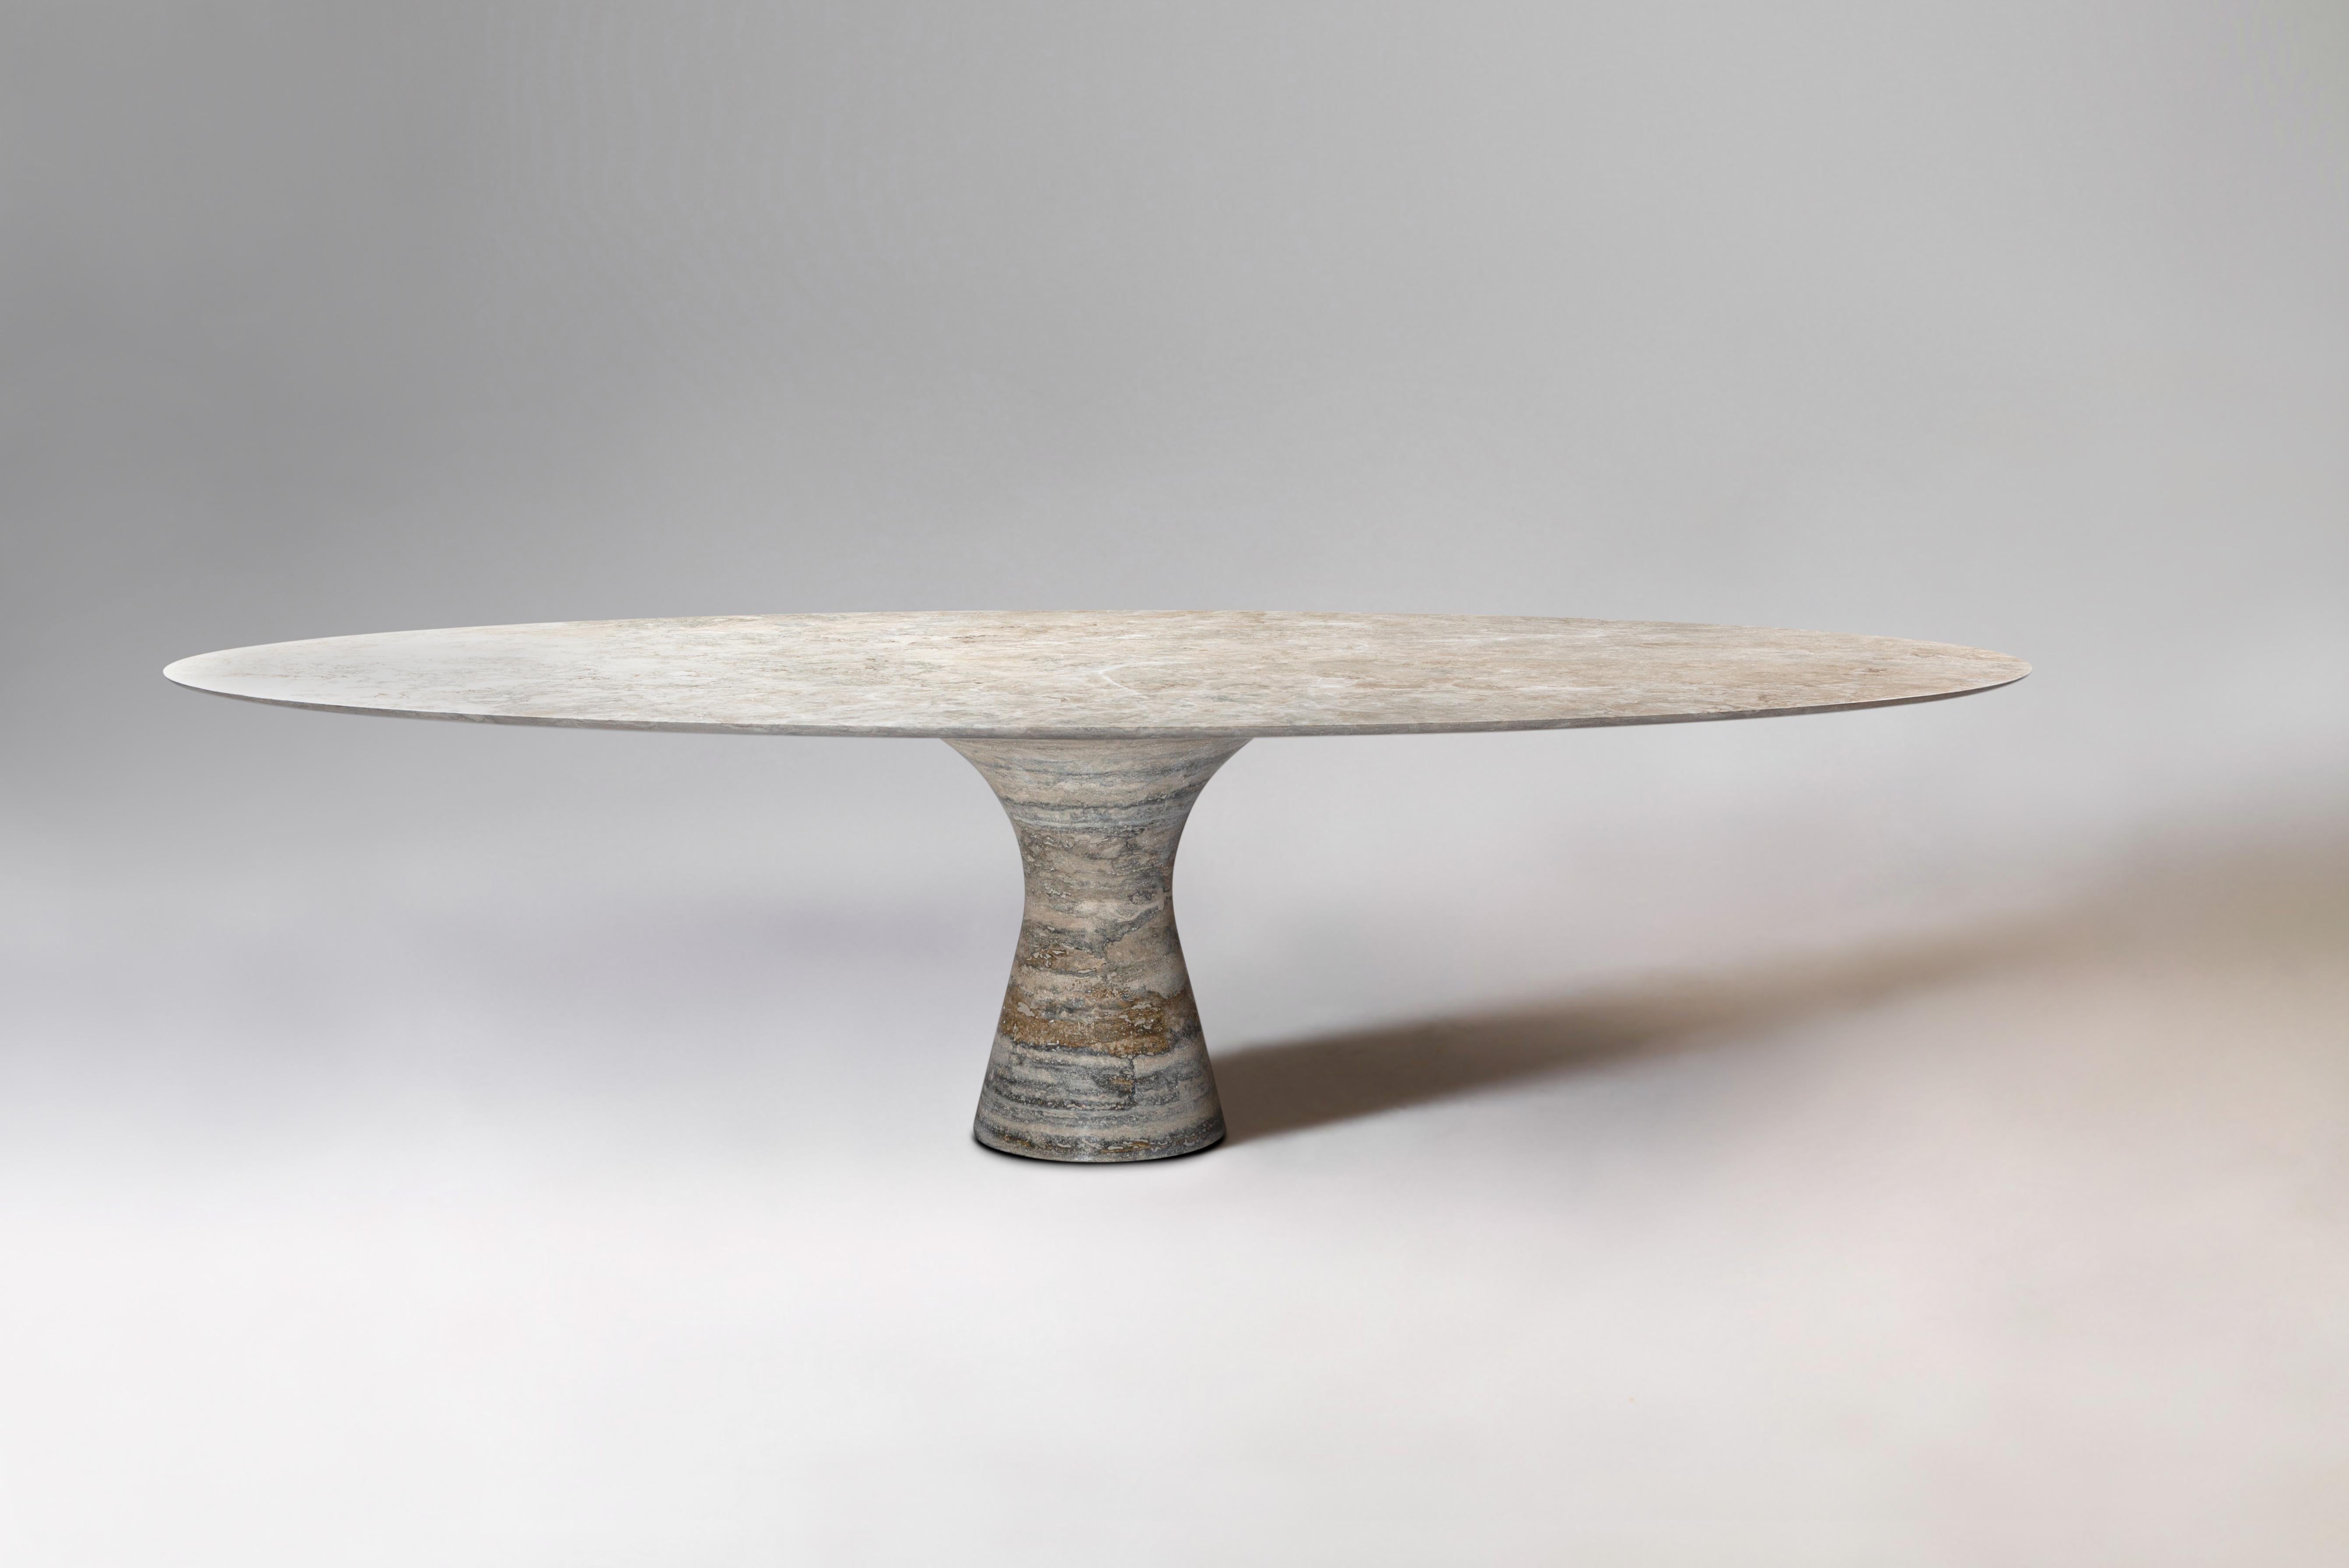 Italian Set of Refined Contemporary Marble Oval Low Table and Side Table